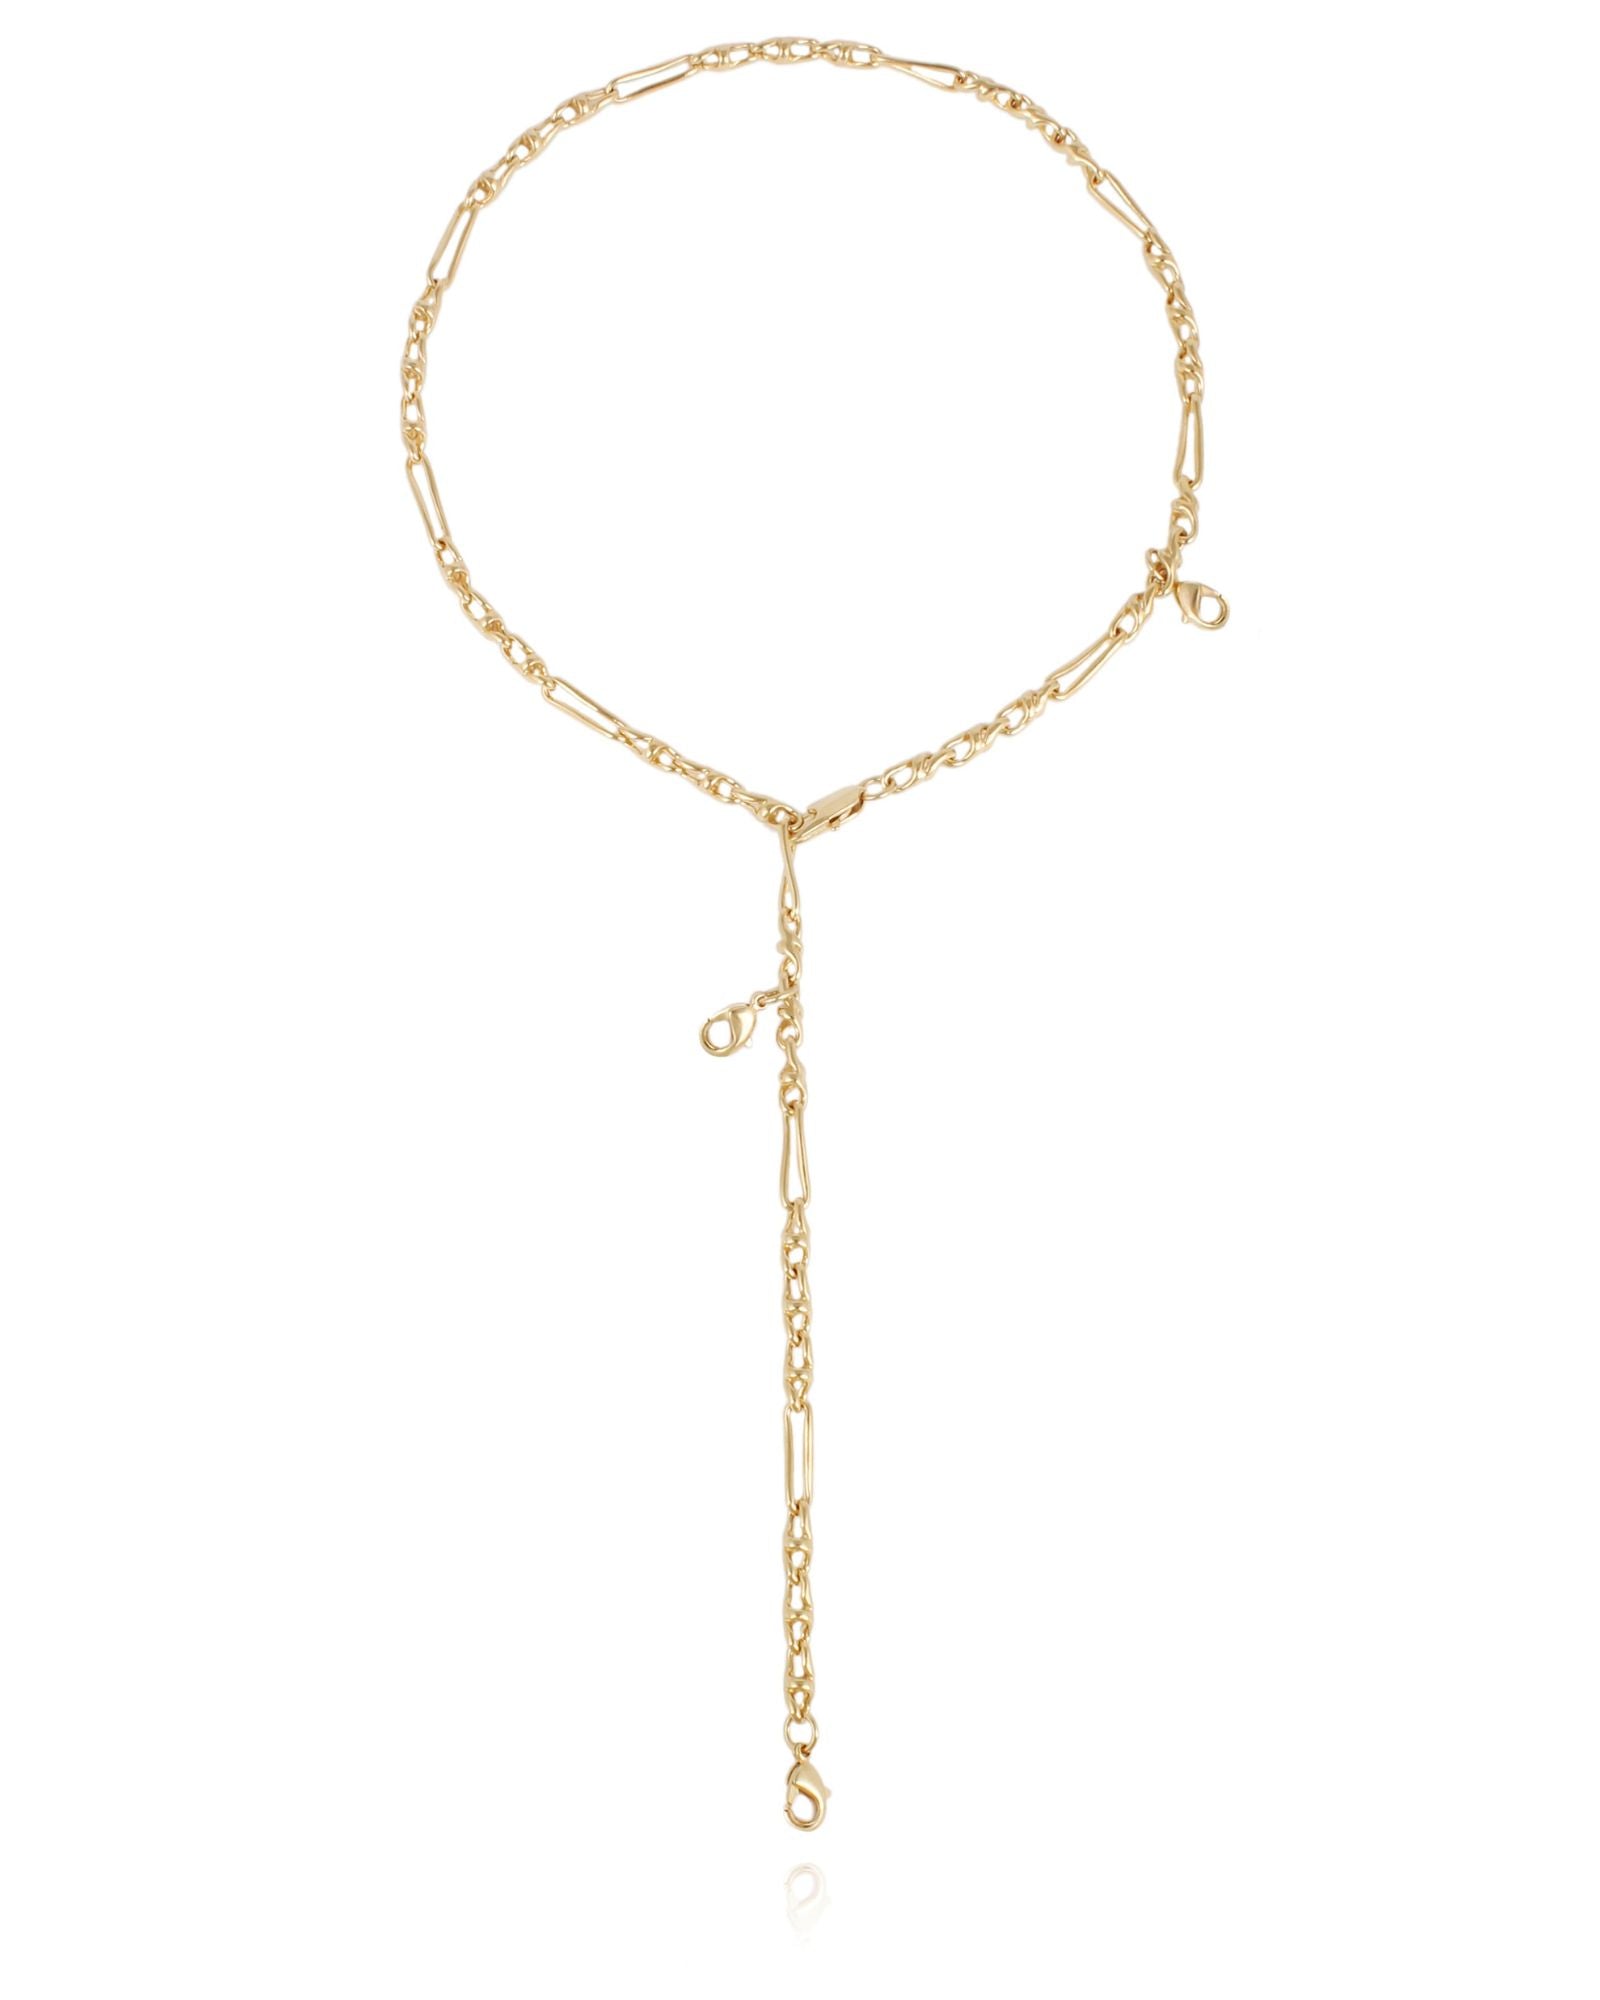 HYPSO PARIS - Necklace with 3 connectors | Gold-plated